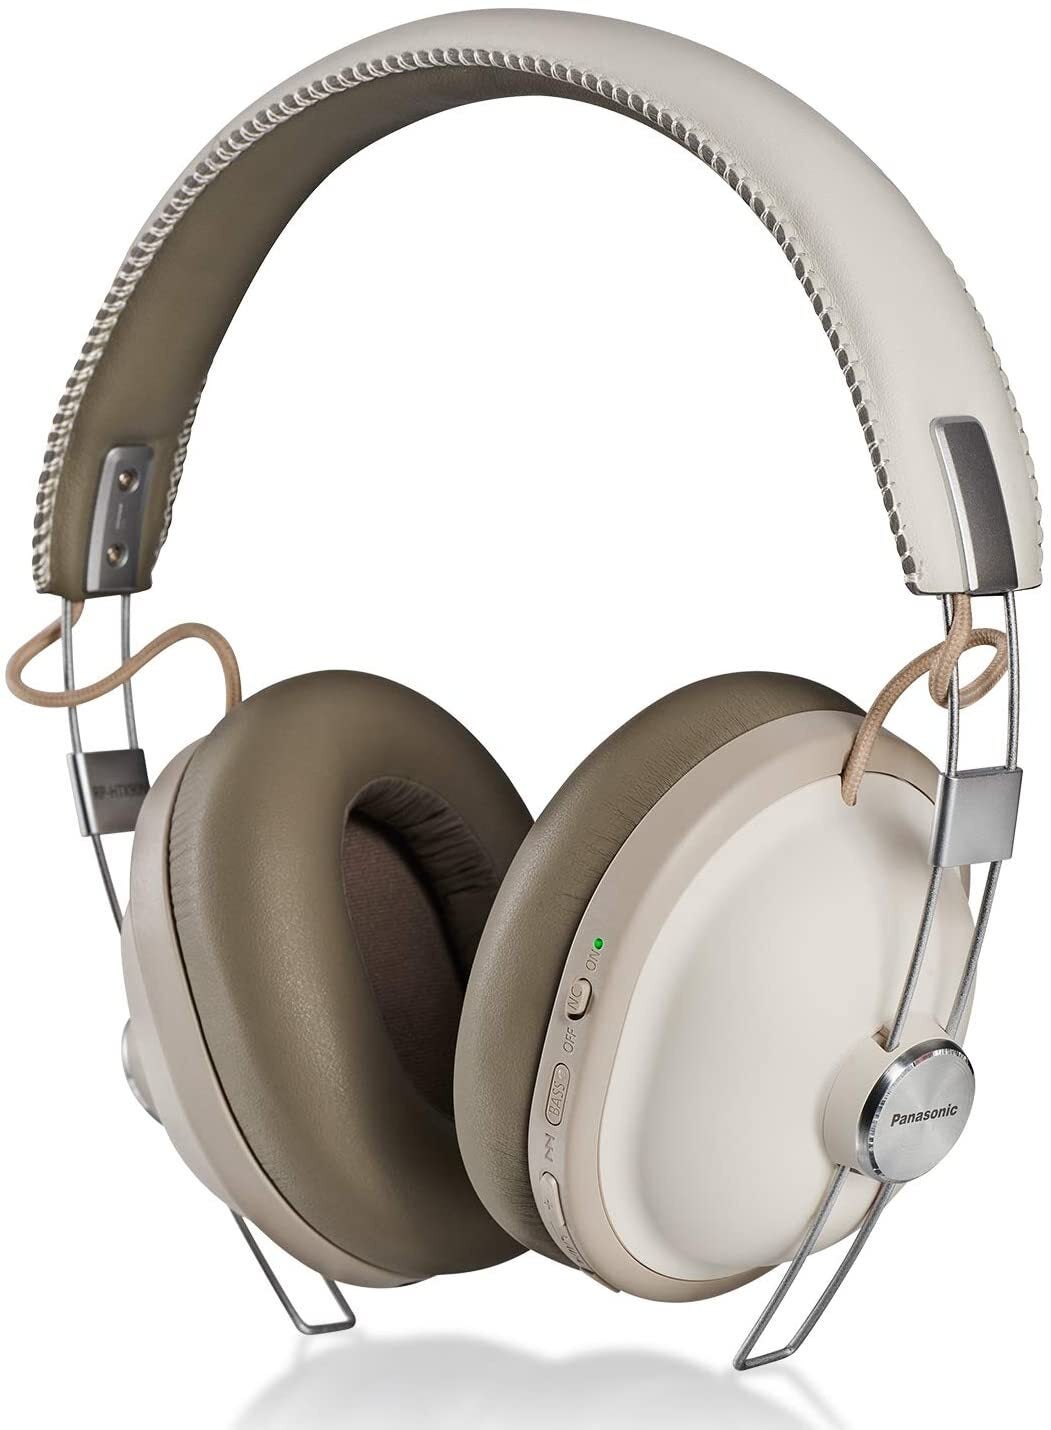 Panasonic&nbsp;RP-HTX90N-W - Customizable over-ear Apple headphones coming soon with swappable parts